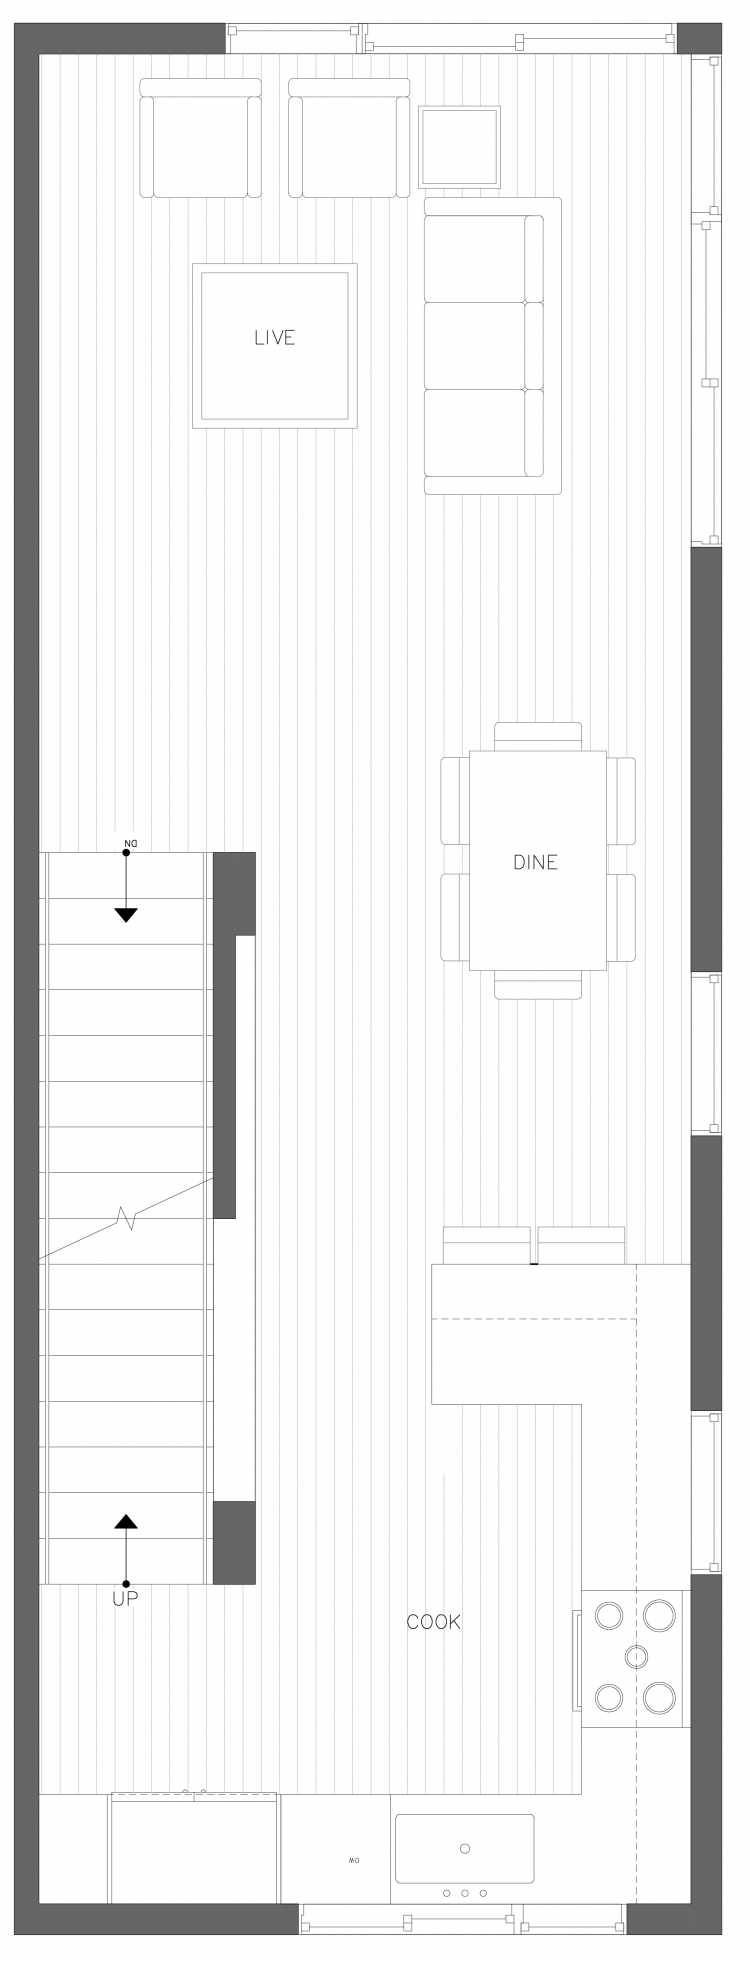 Second Floor Plan of 3410B 15th Ave W, One of the Arlo Townhomes in North Queen Anne